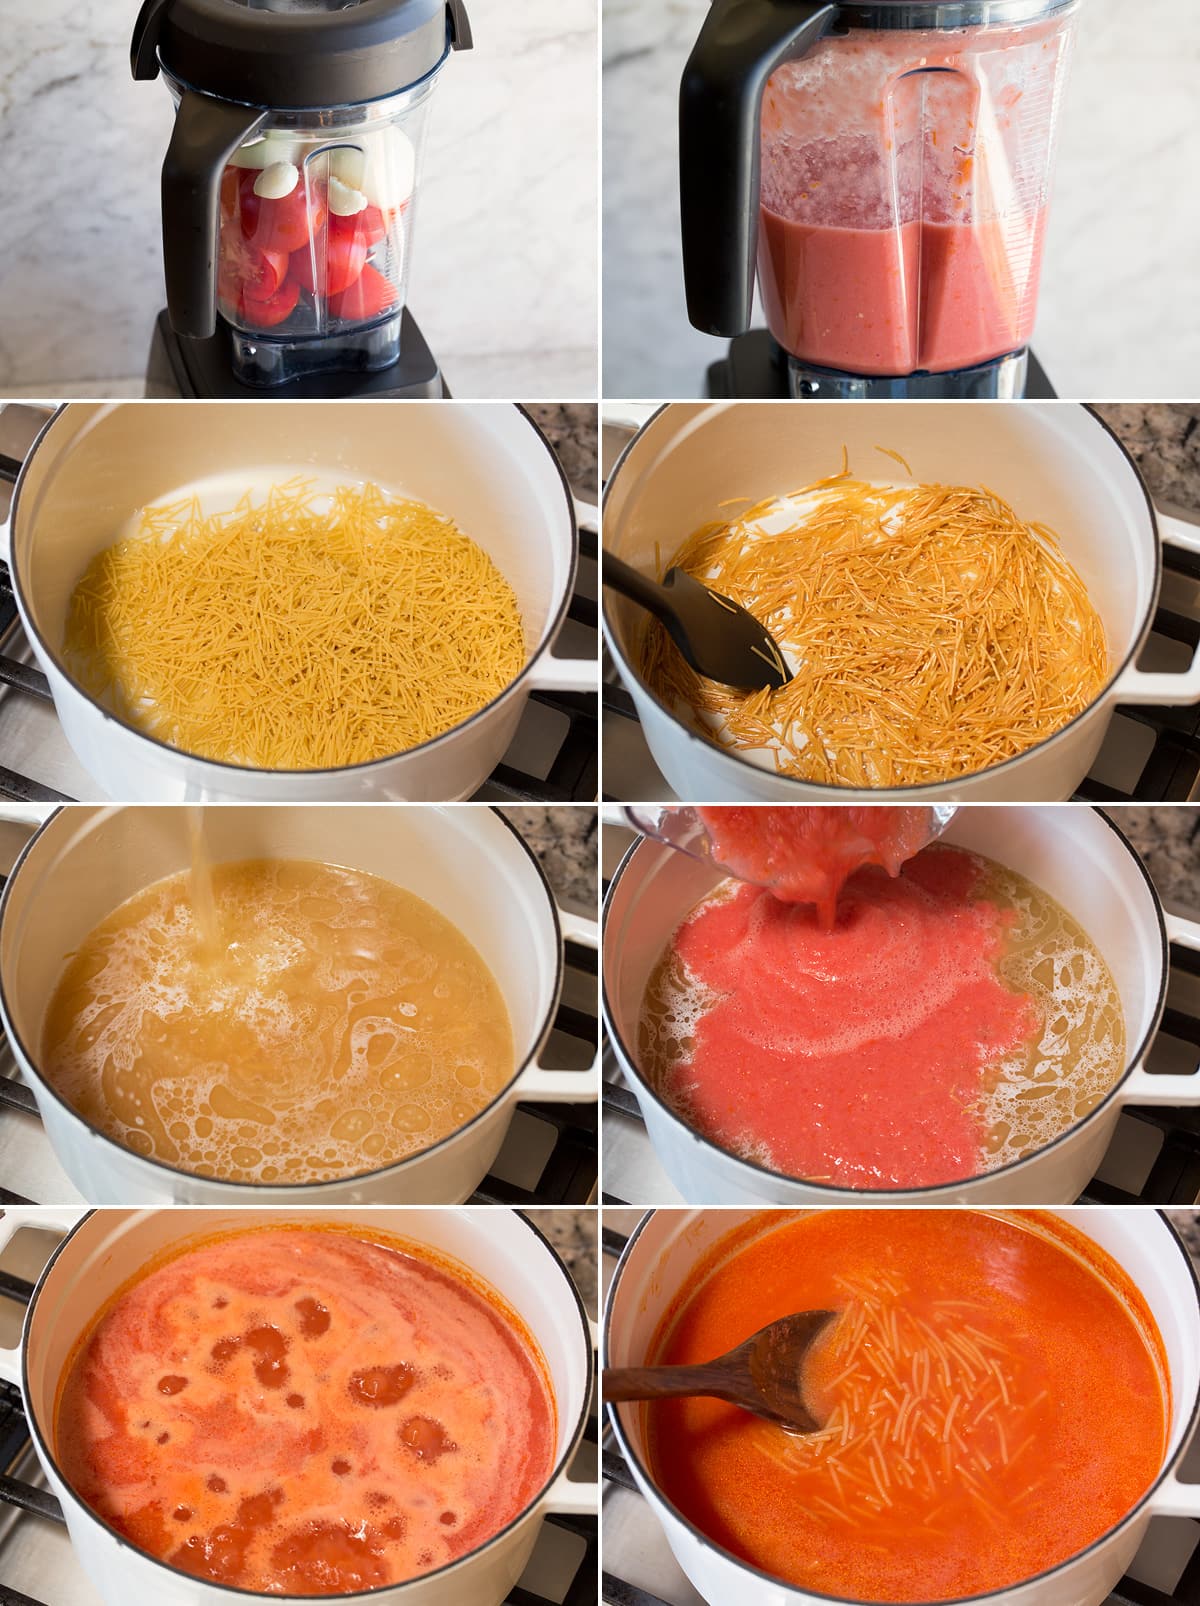 Photos showing steps of making sopa de fideo in a blender and a pot.